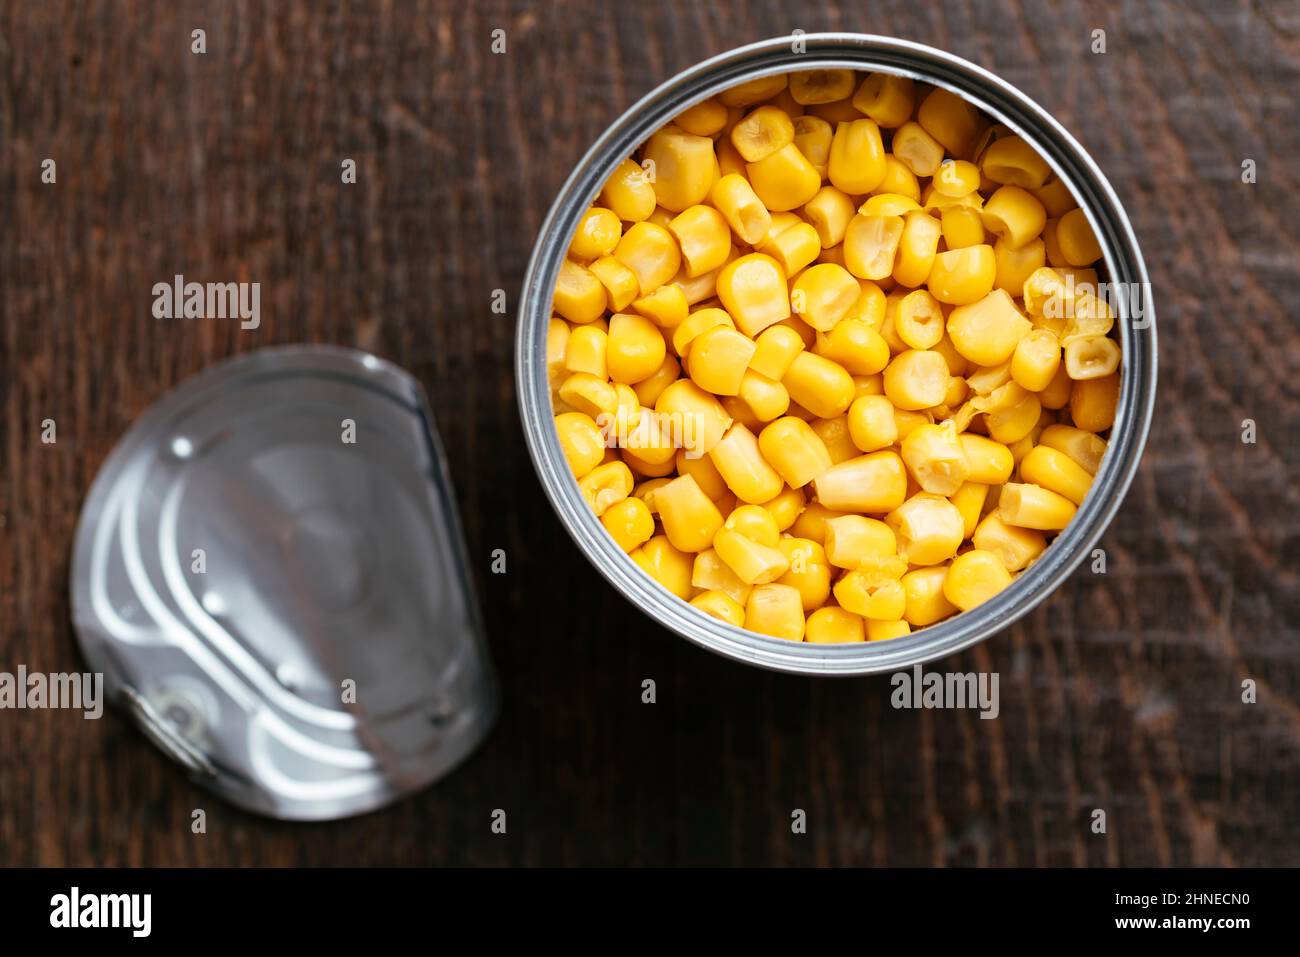 Overhead view of an opened can with sweet corn. Stock Photo